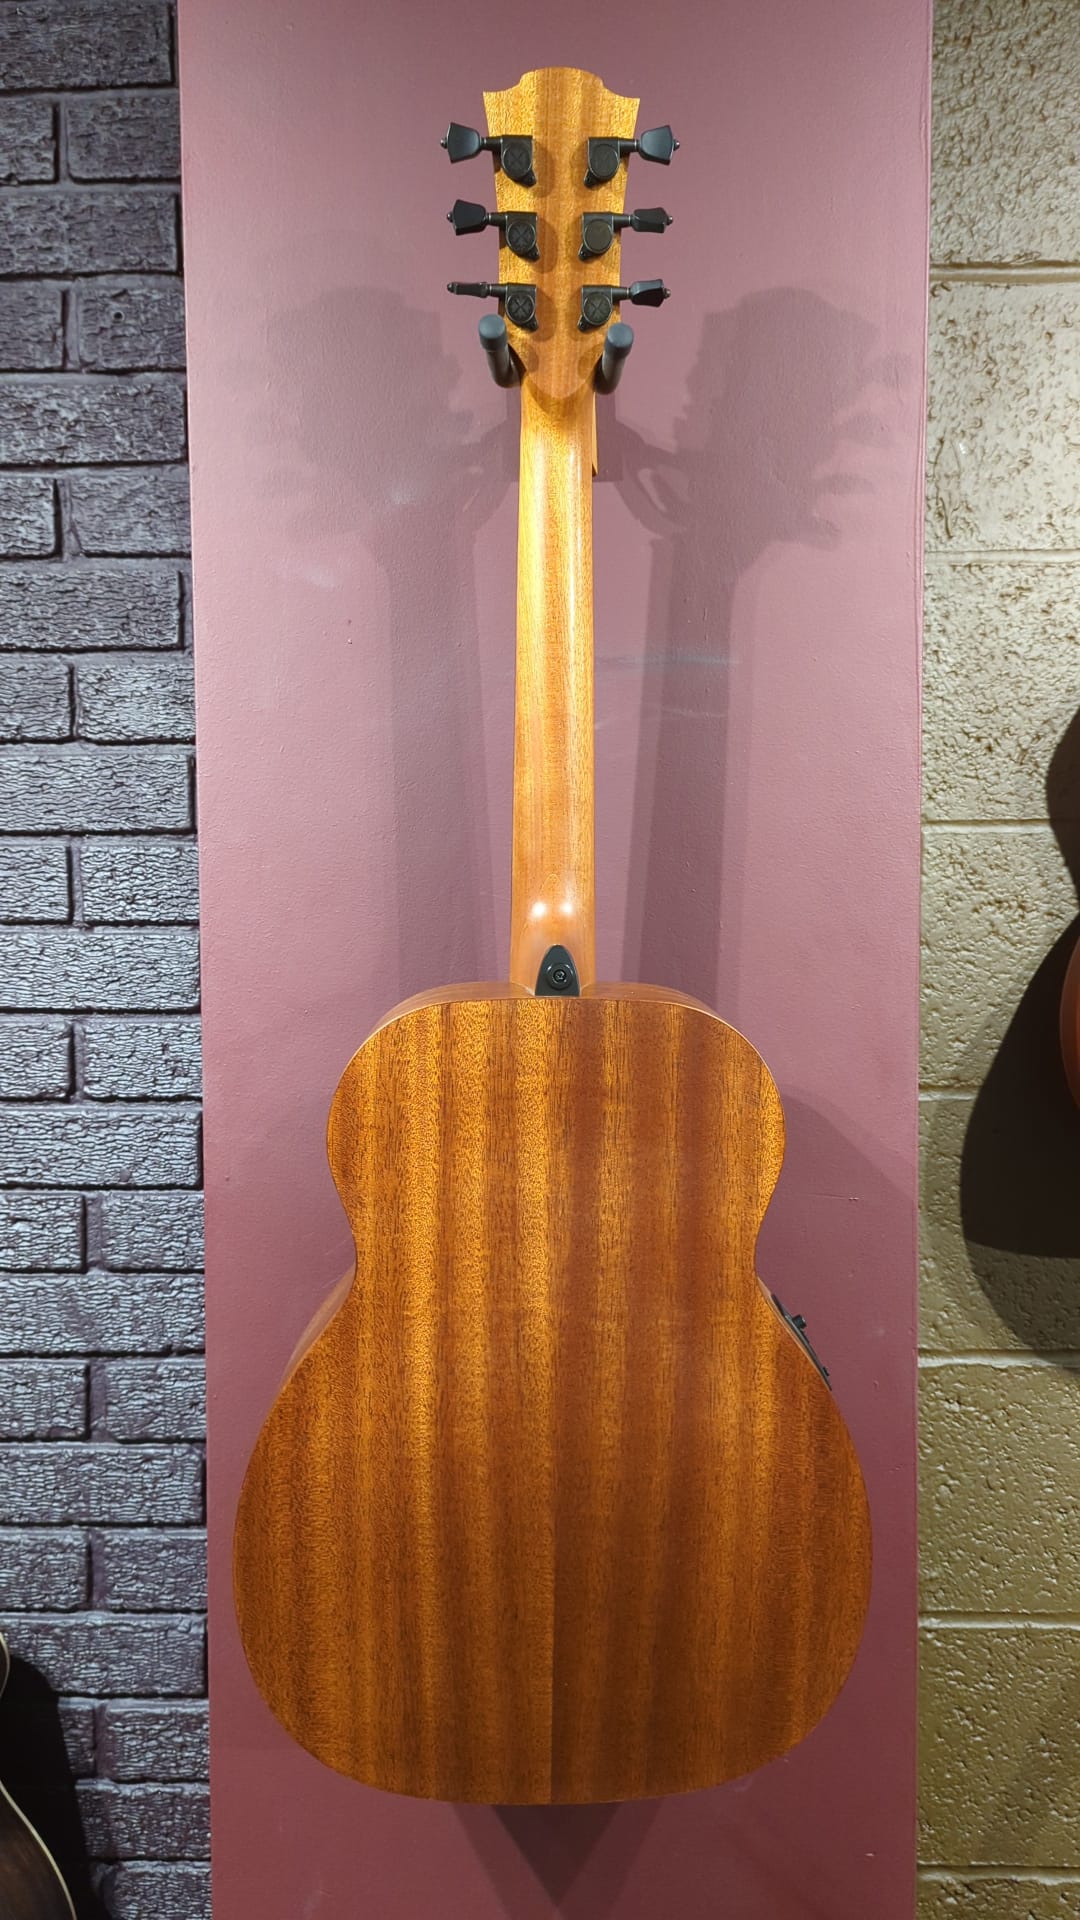 LAG Travel electro-acoustic Solid Cedar top. (Used), Electro Acoustic Guitar for sale at Richards Guitars.